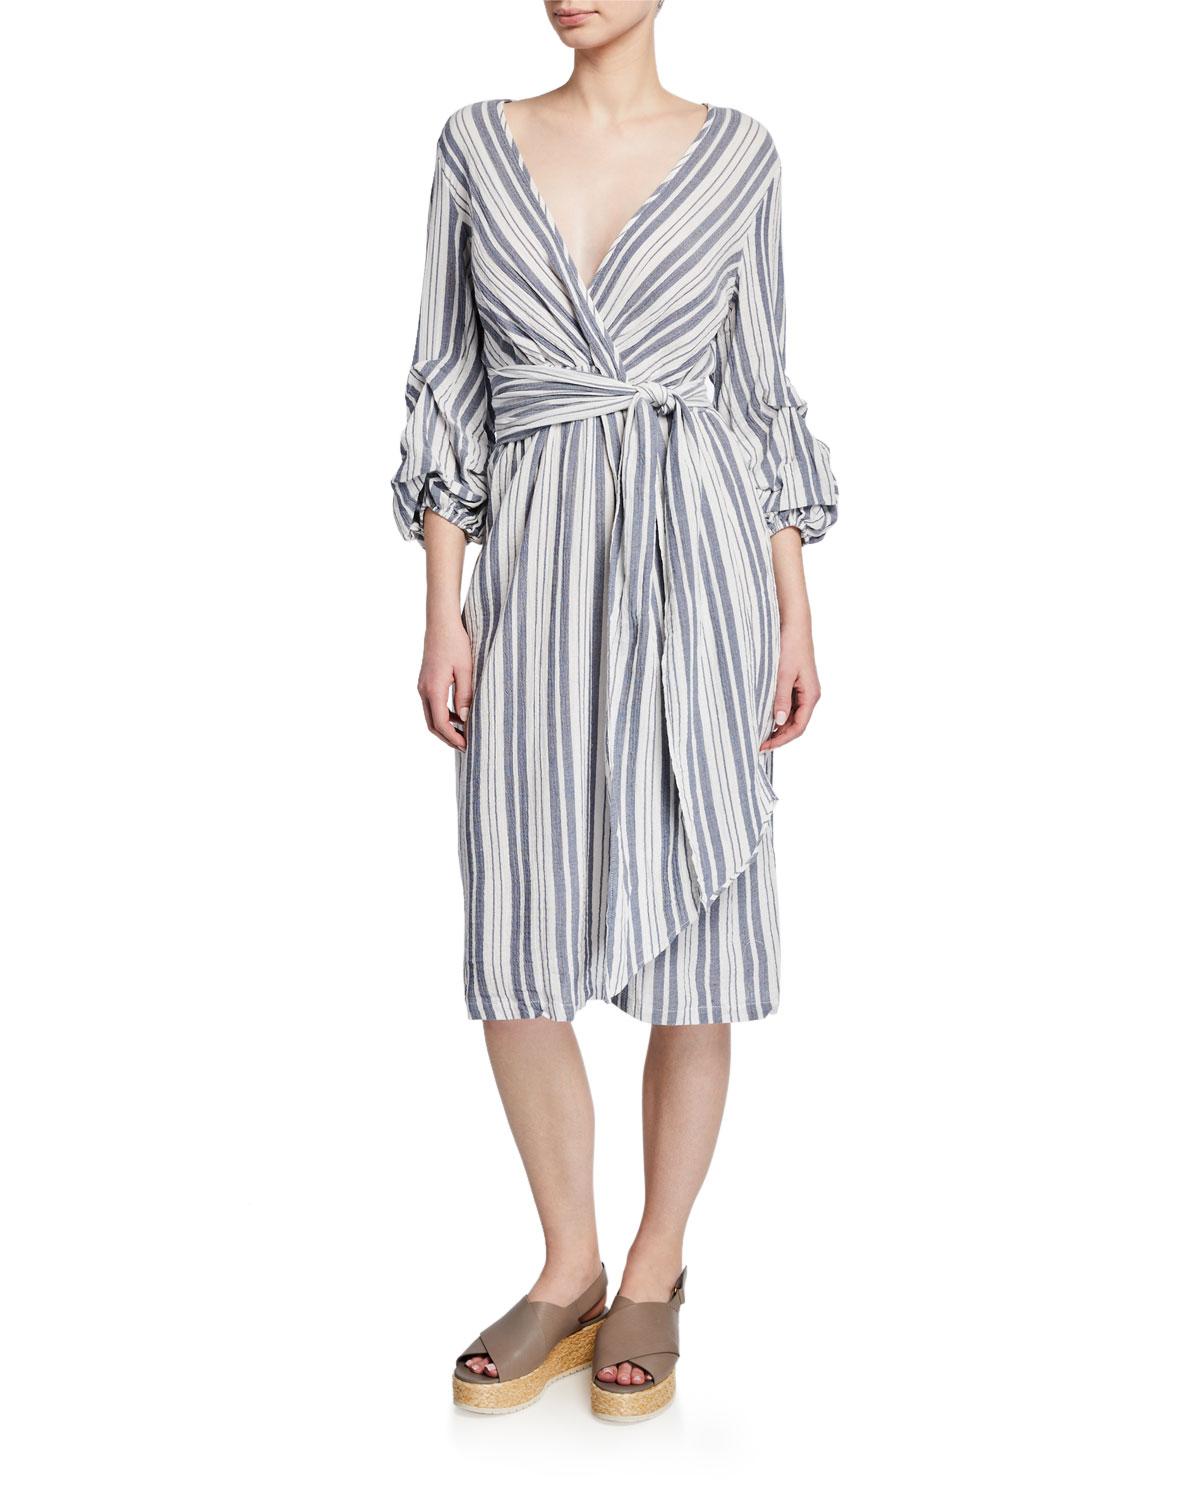 Lyst - Max Studio Ruched-sleeve Striped Wrap Dress in Blue